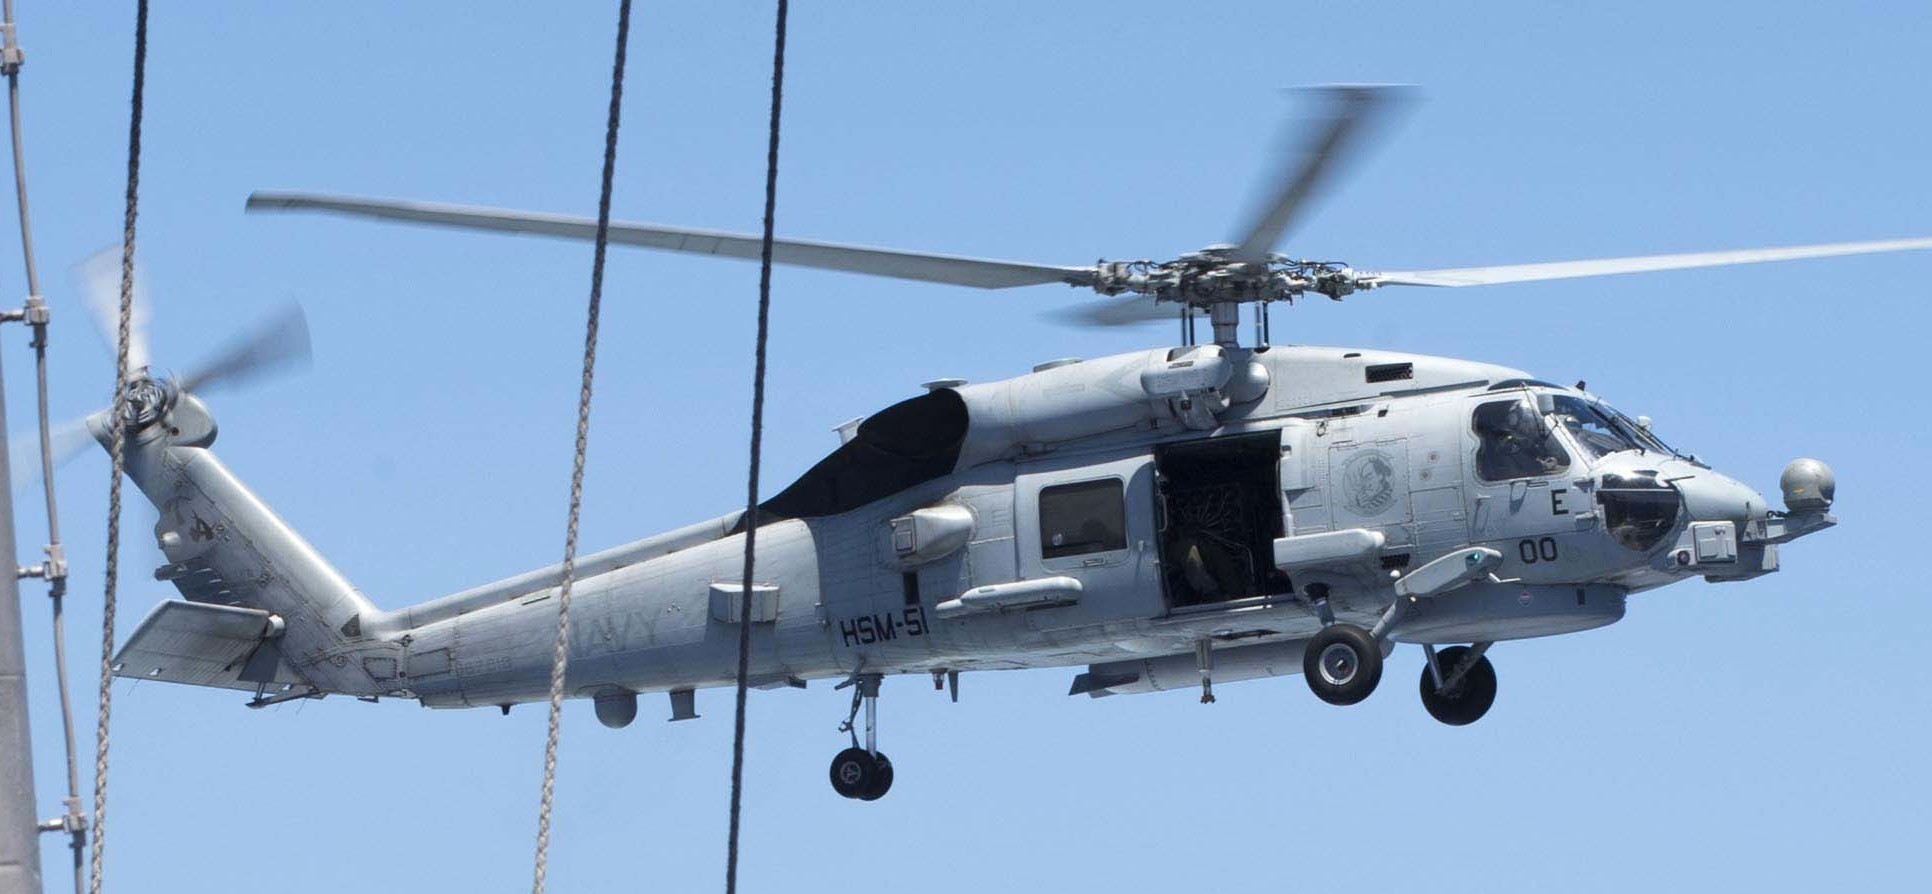 hsm-51 warlords helicopter maritime strike squadron mh-60r seahawk navy 2014 66